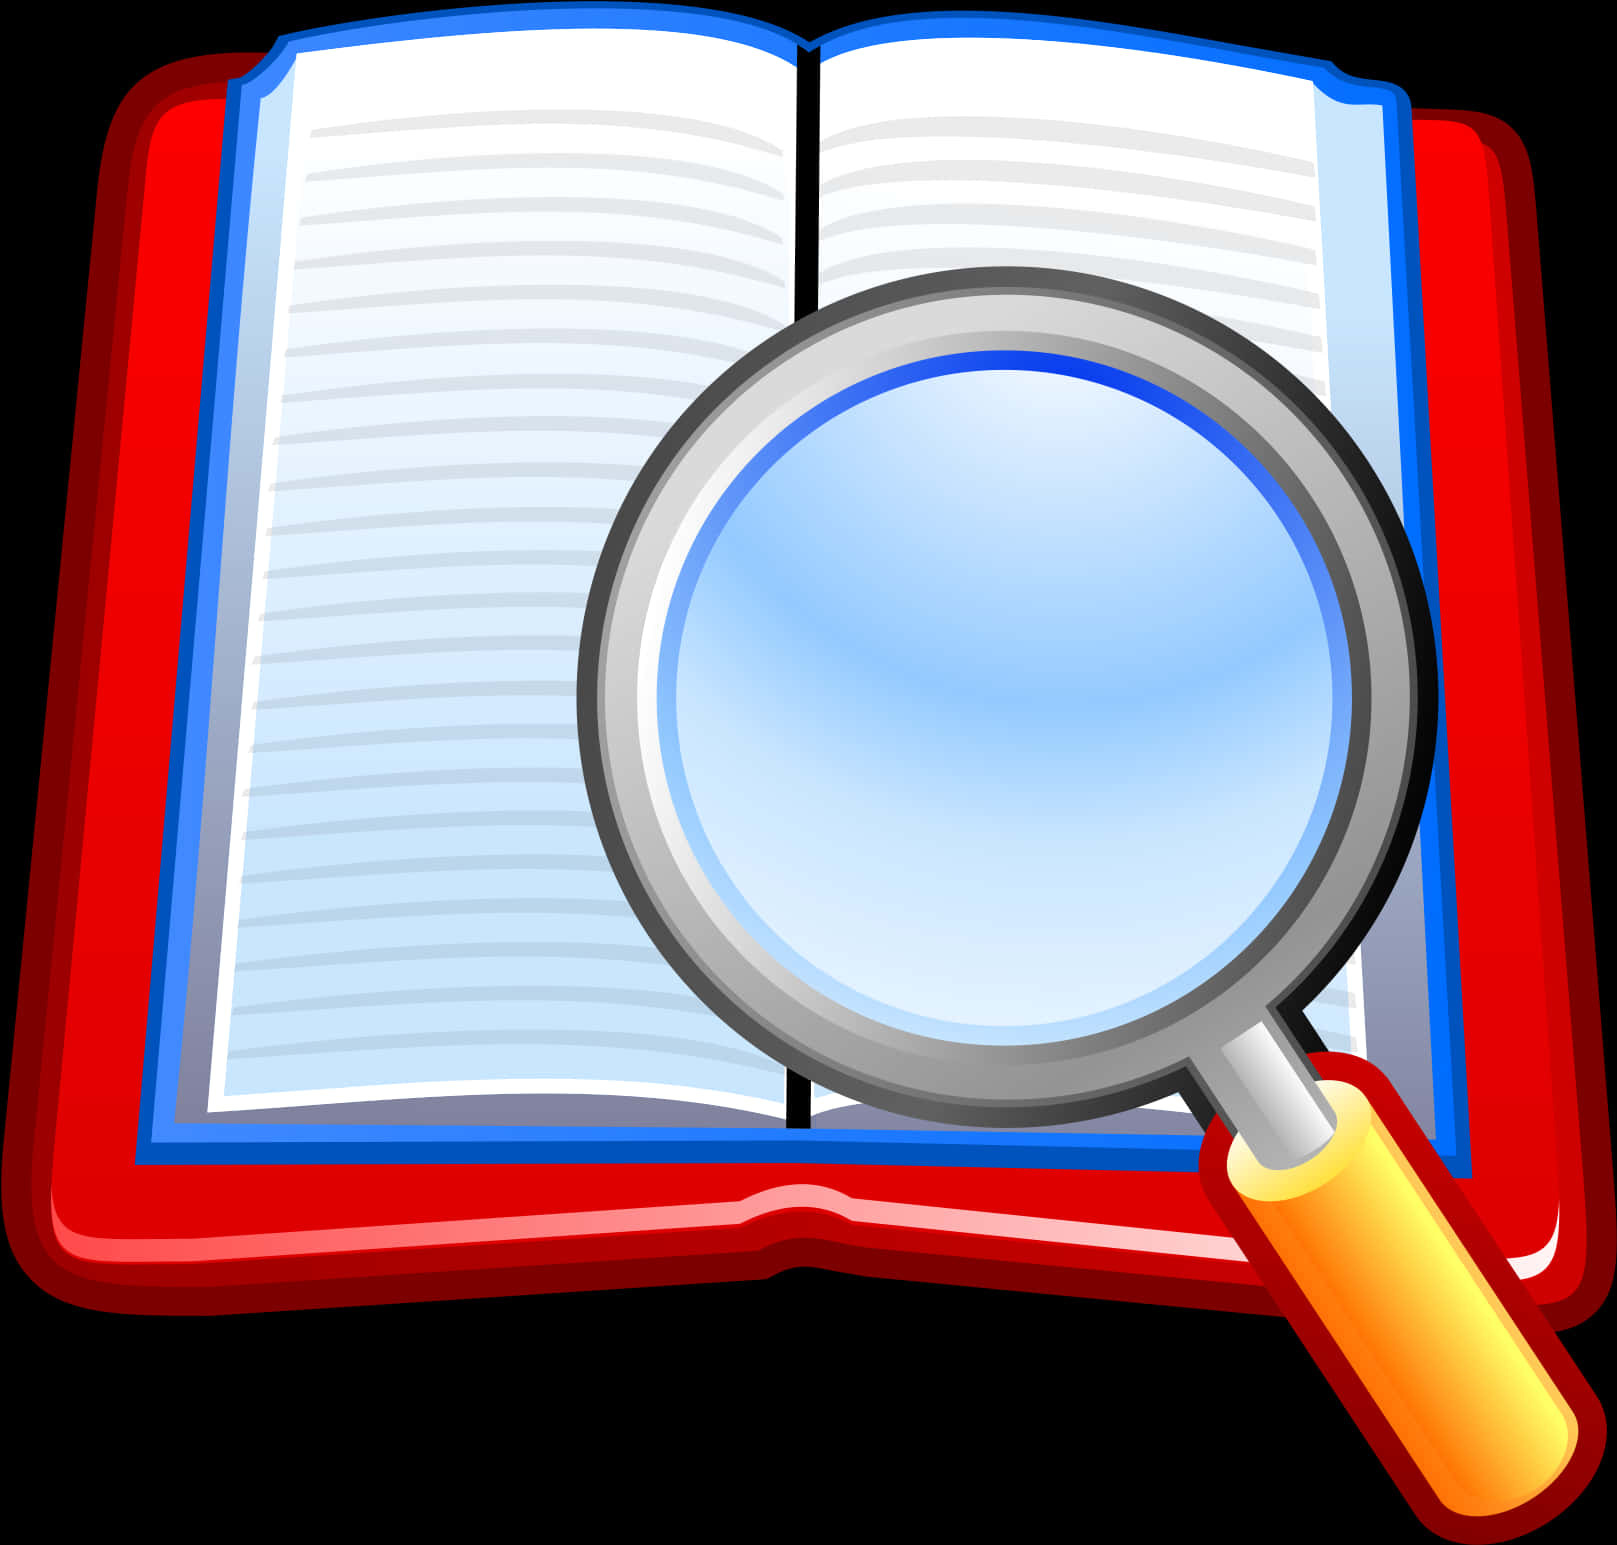 Open Book And Magnifying Glass